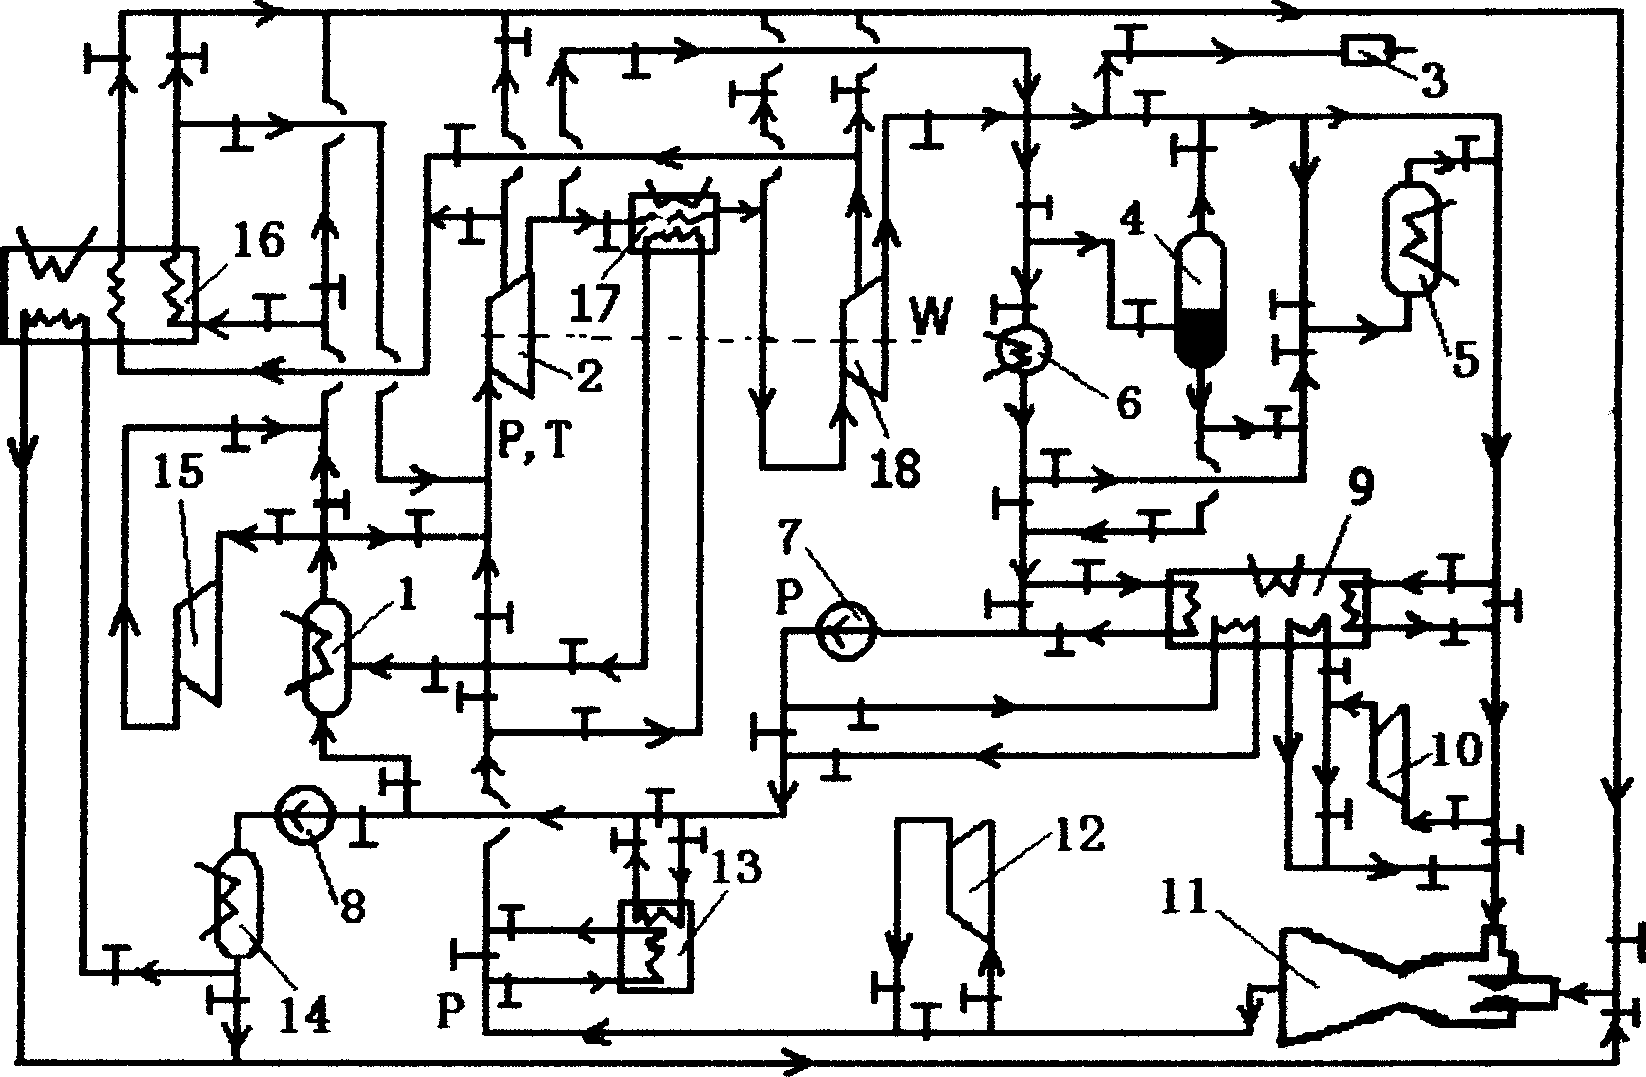 Steam power circulation and device